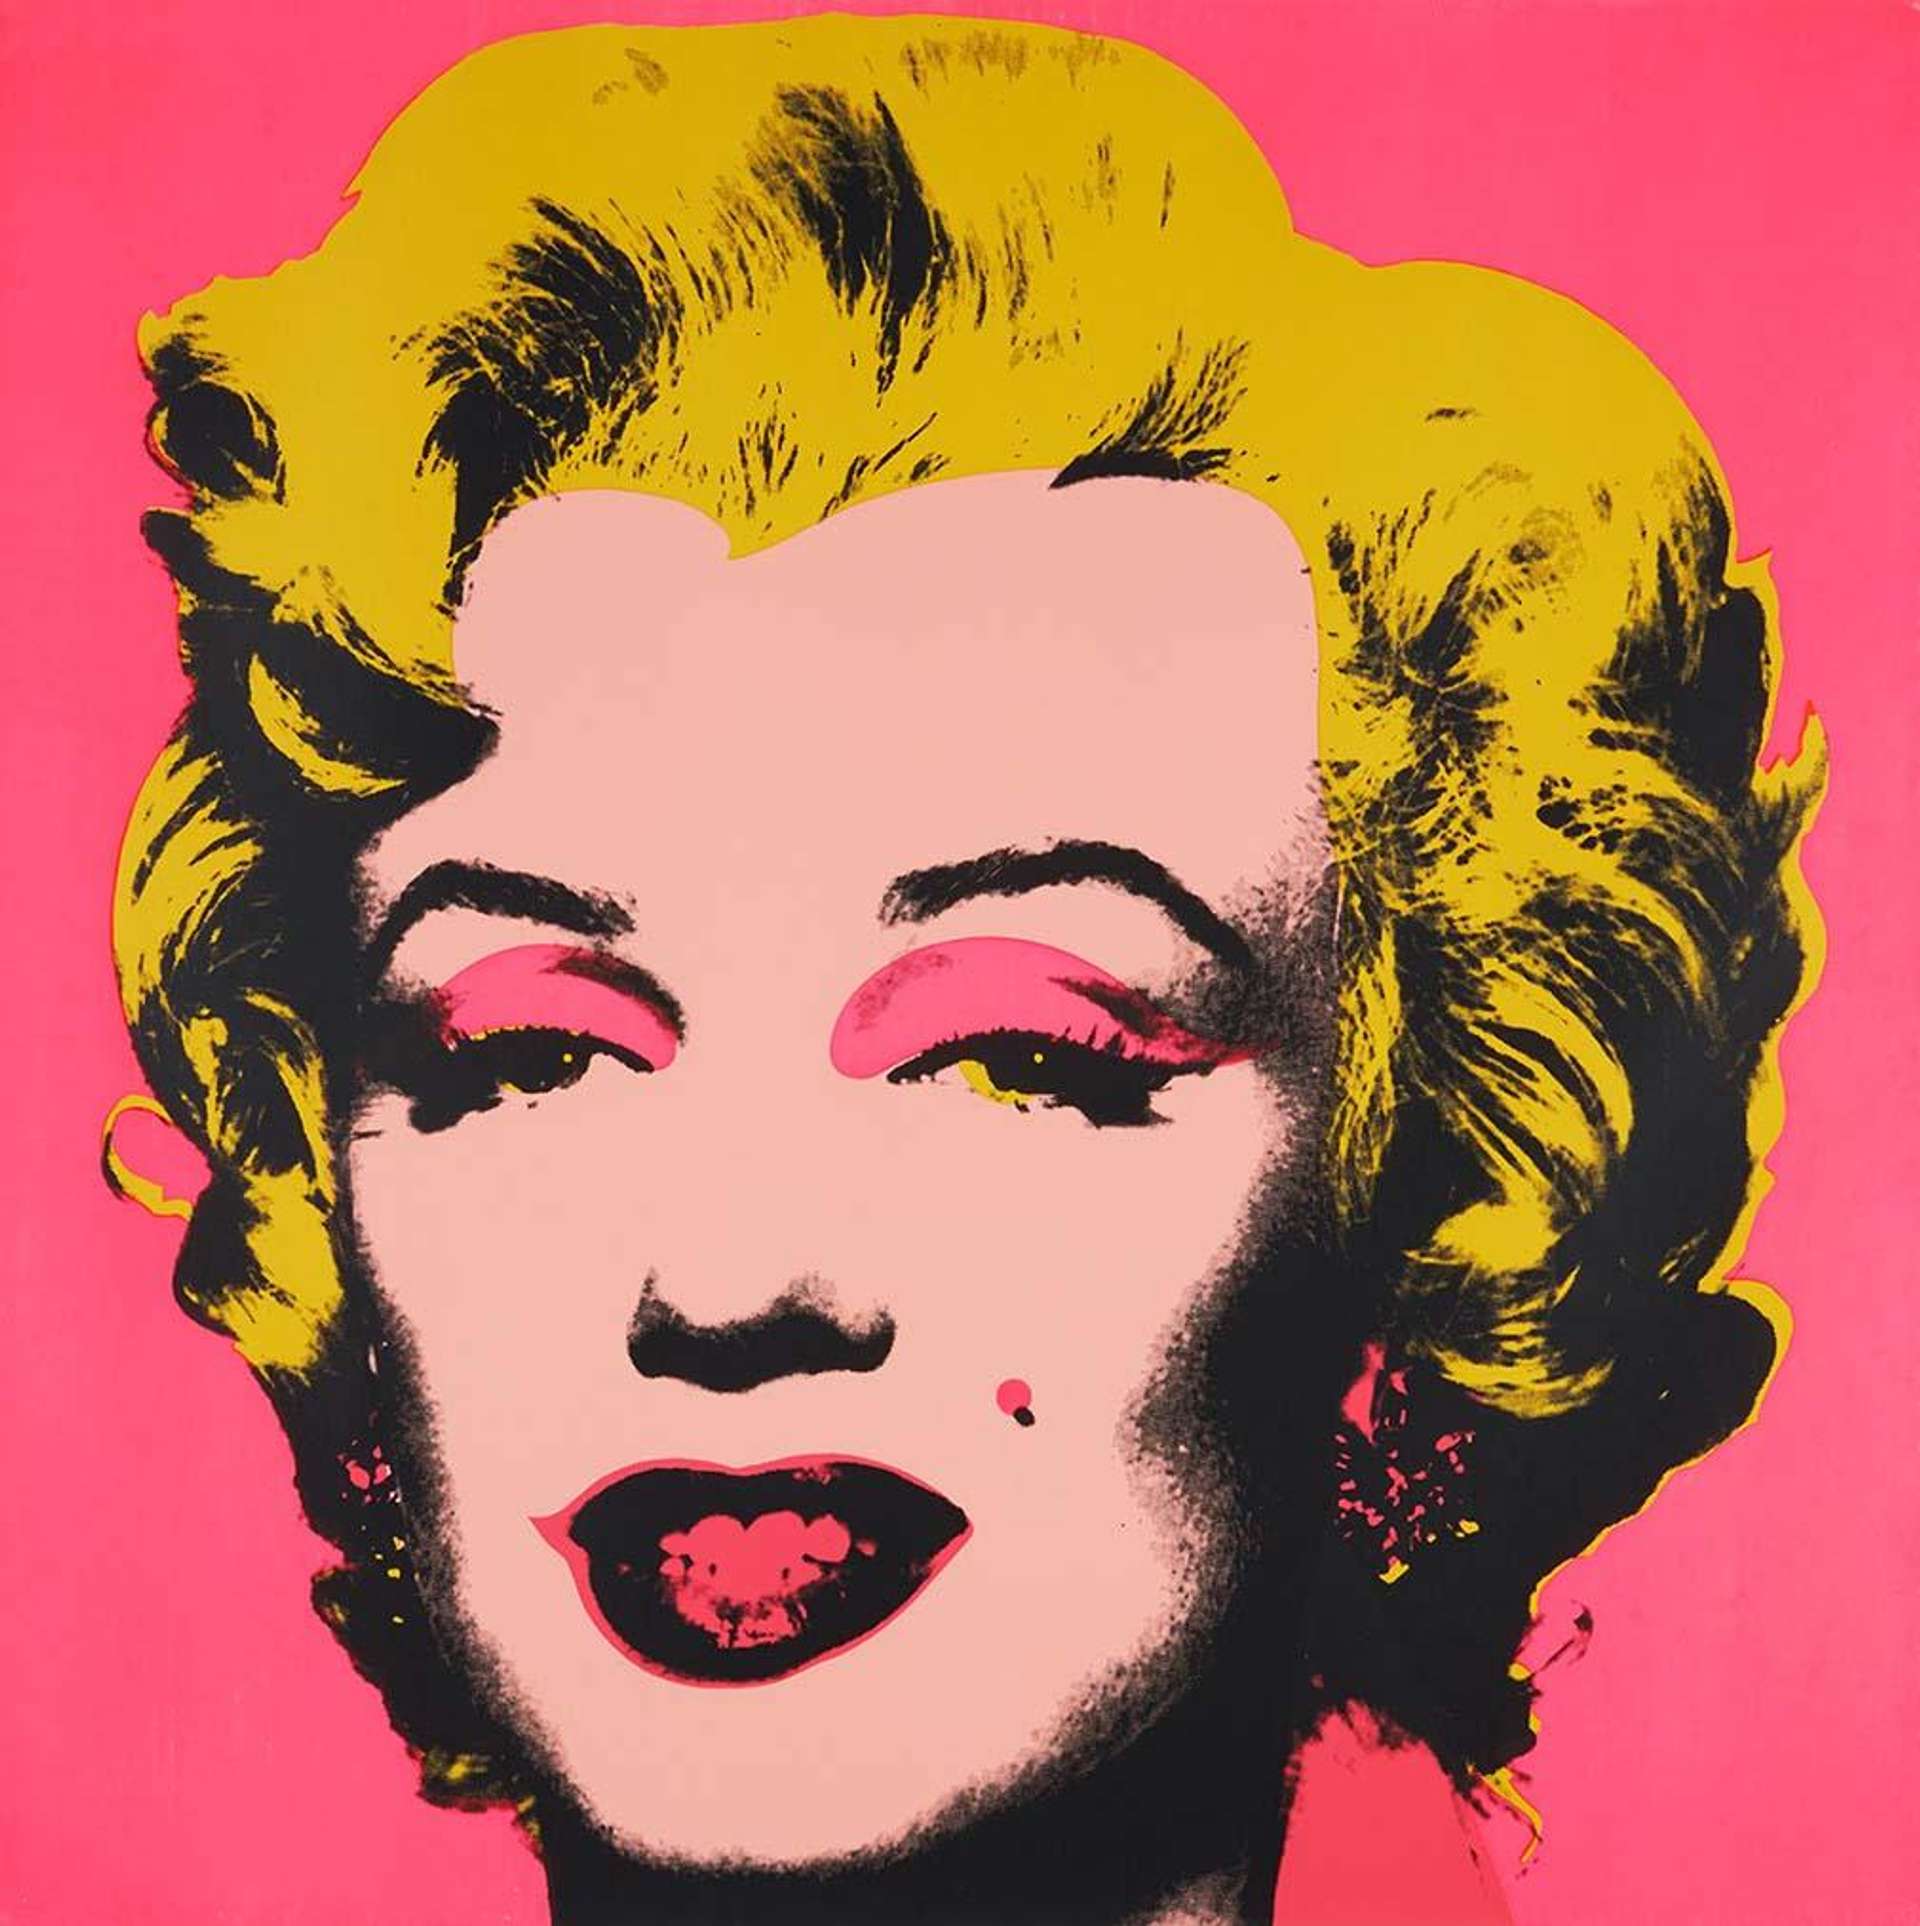 A Pop Art screen print by Andy Warhol depicting Hollywood icon Marilyn Monroe against a bright pink background.